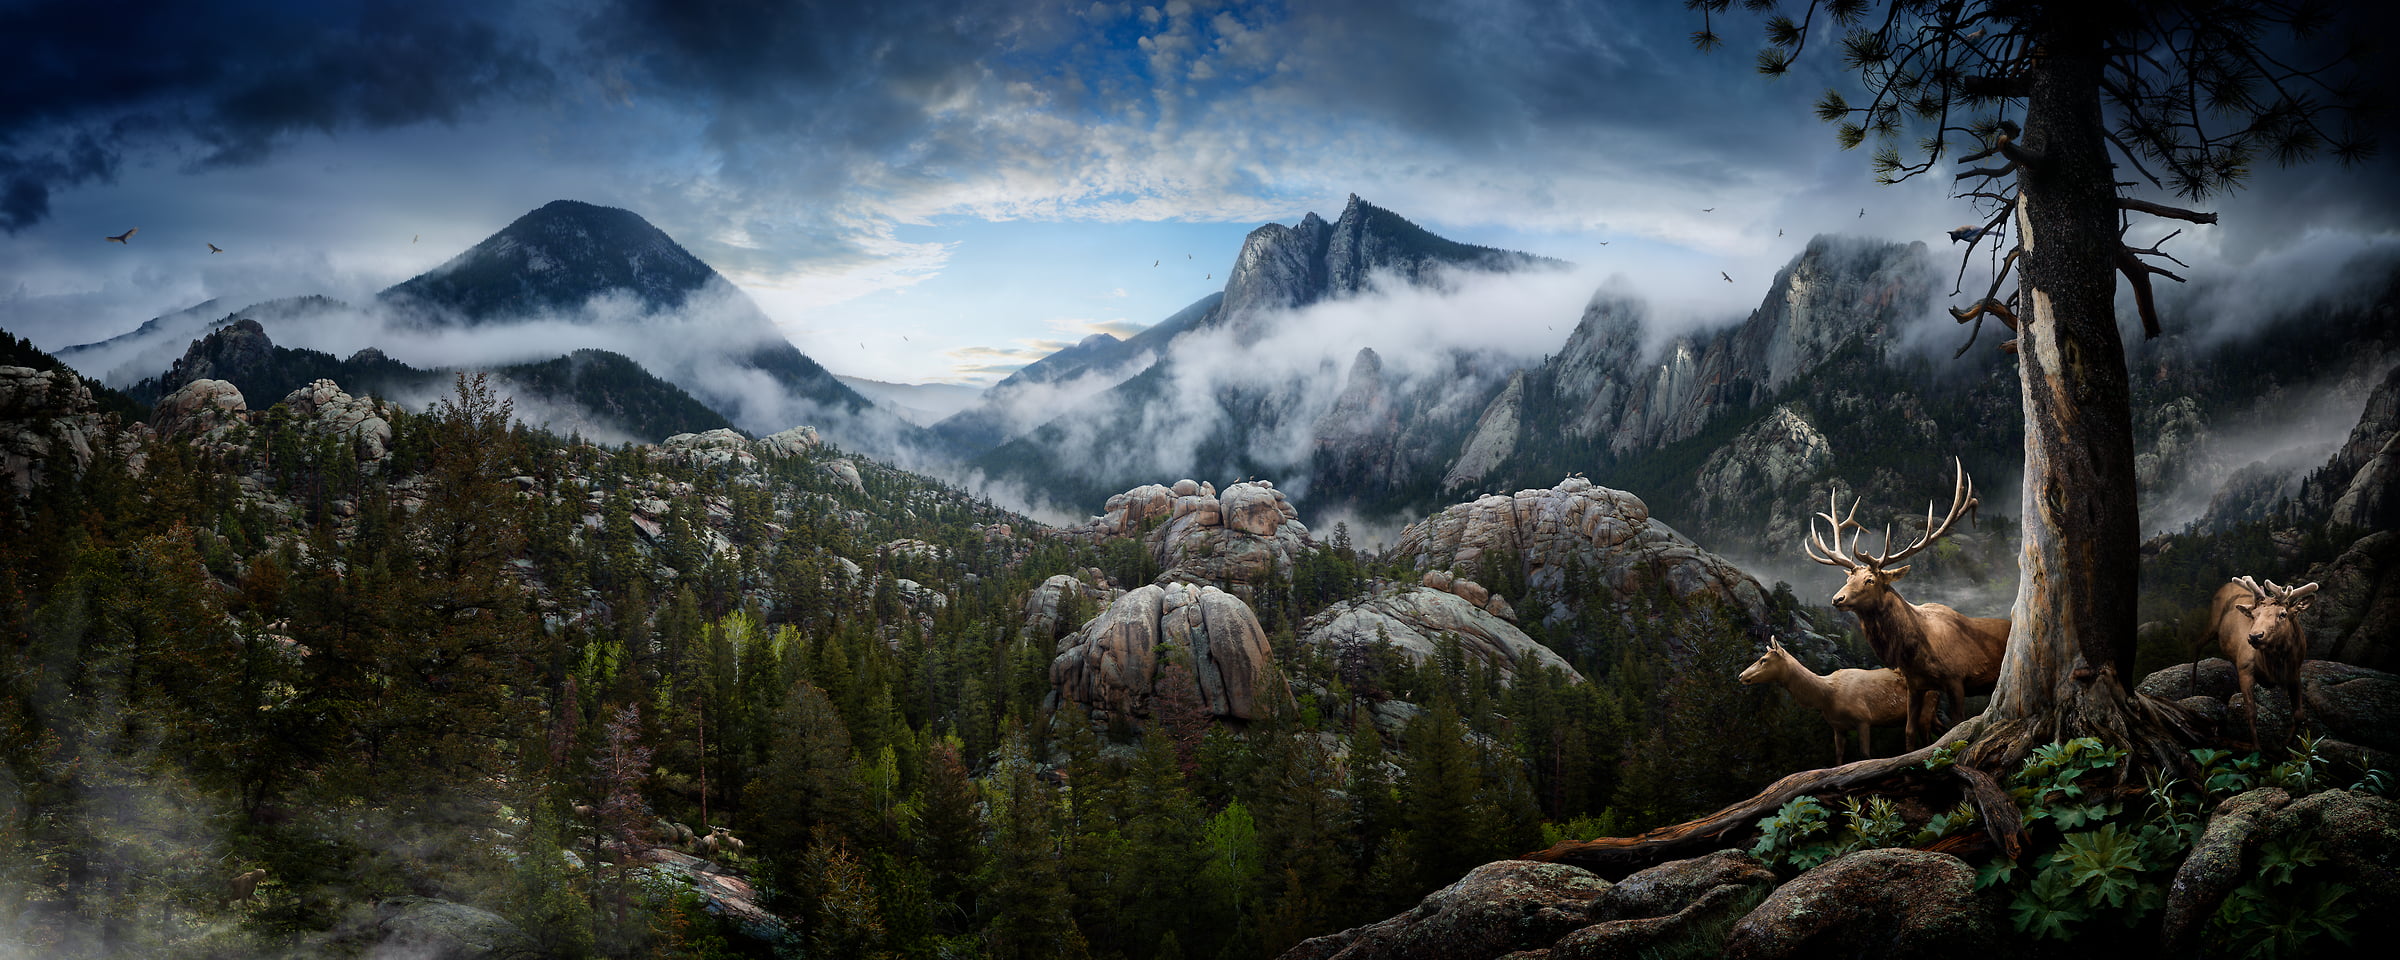 360 megapixels! A very high resolution, large-format landscape photo of an imaginary scene with mountains, deer, wildlife, birds, forests, and clouds; artwork created by artist Nick Pedersen.